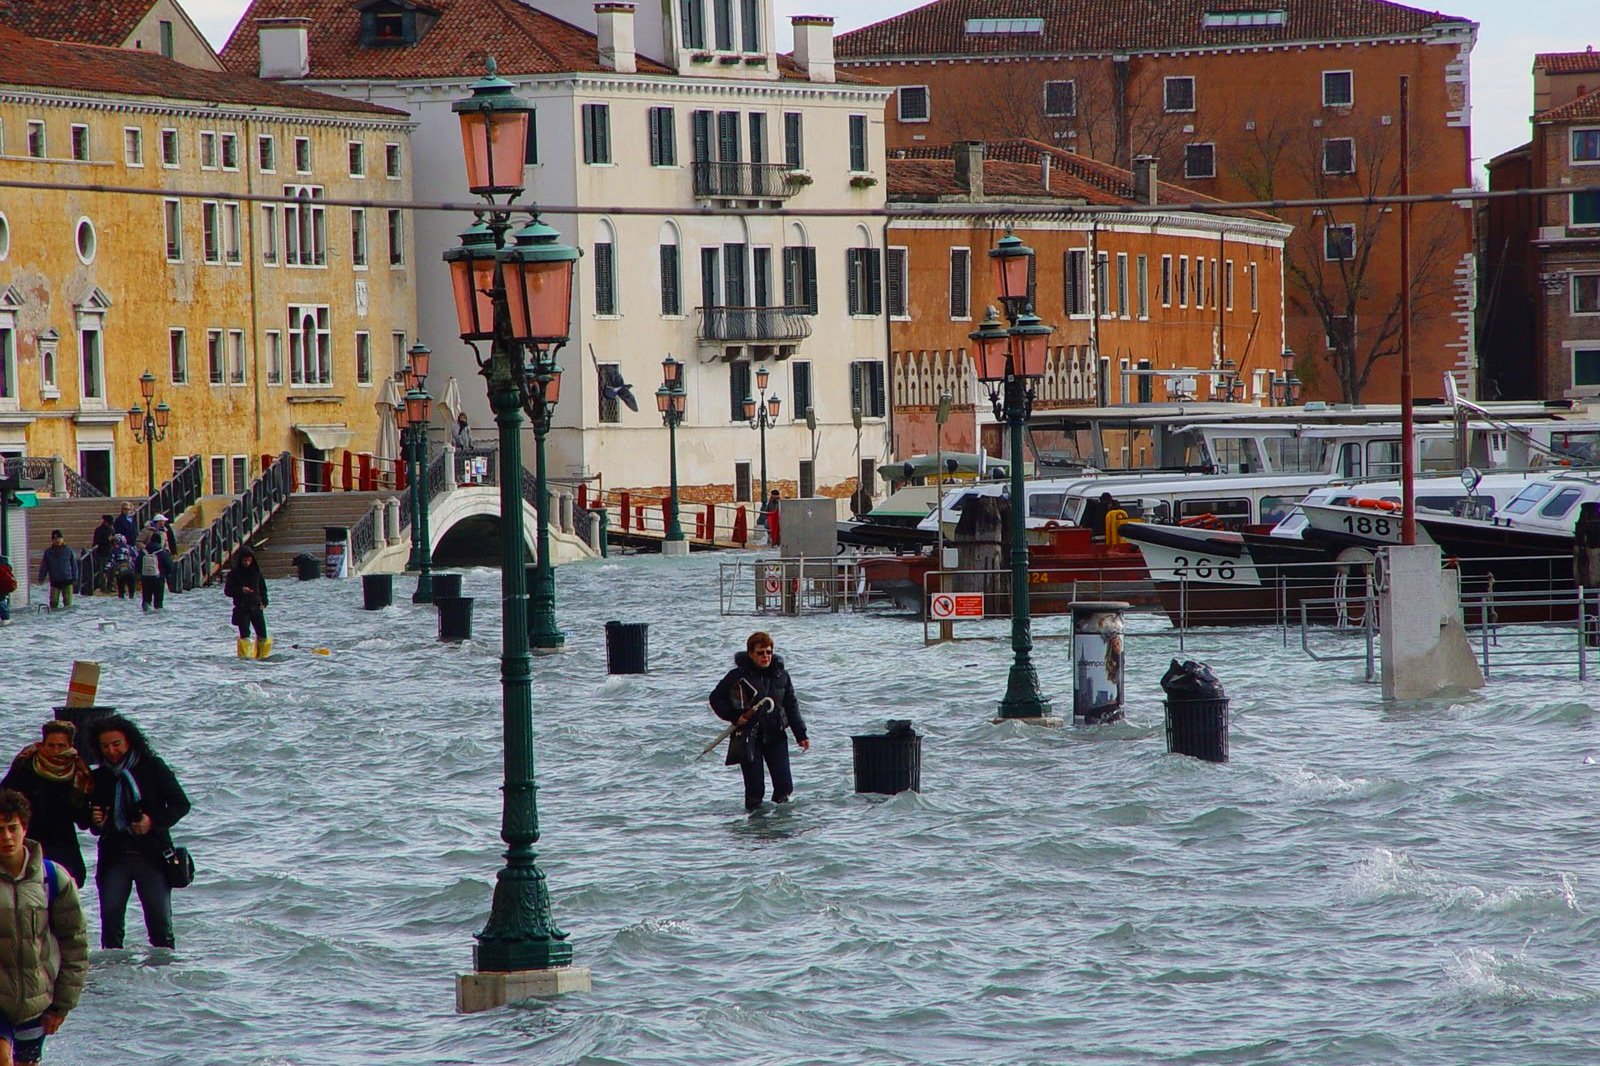 How to see the famous Acqua Alta flooding in Venice